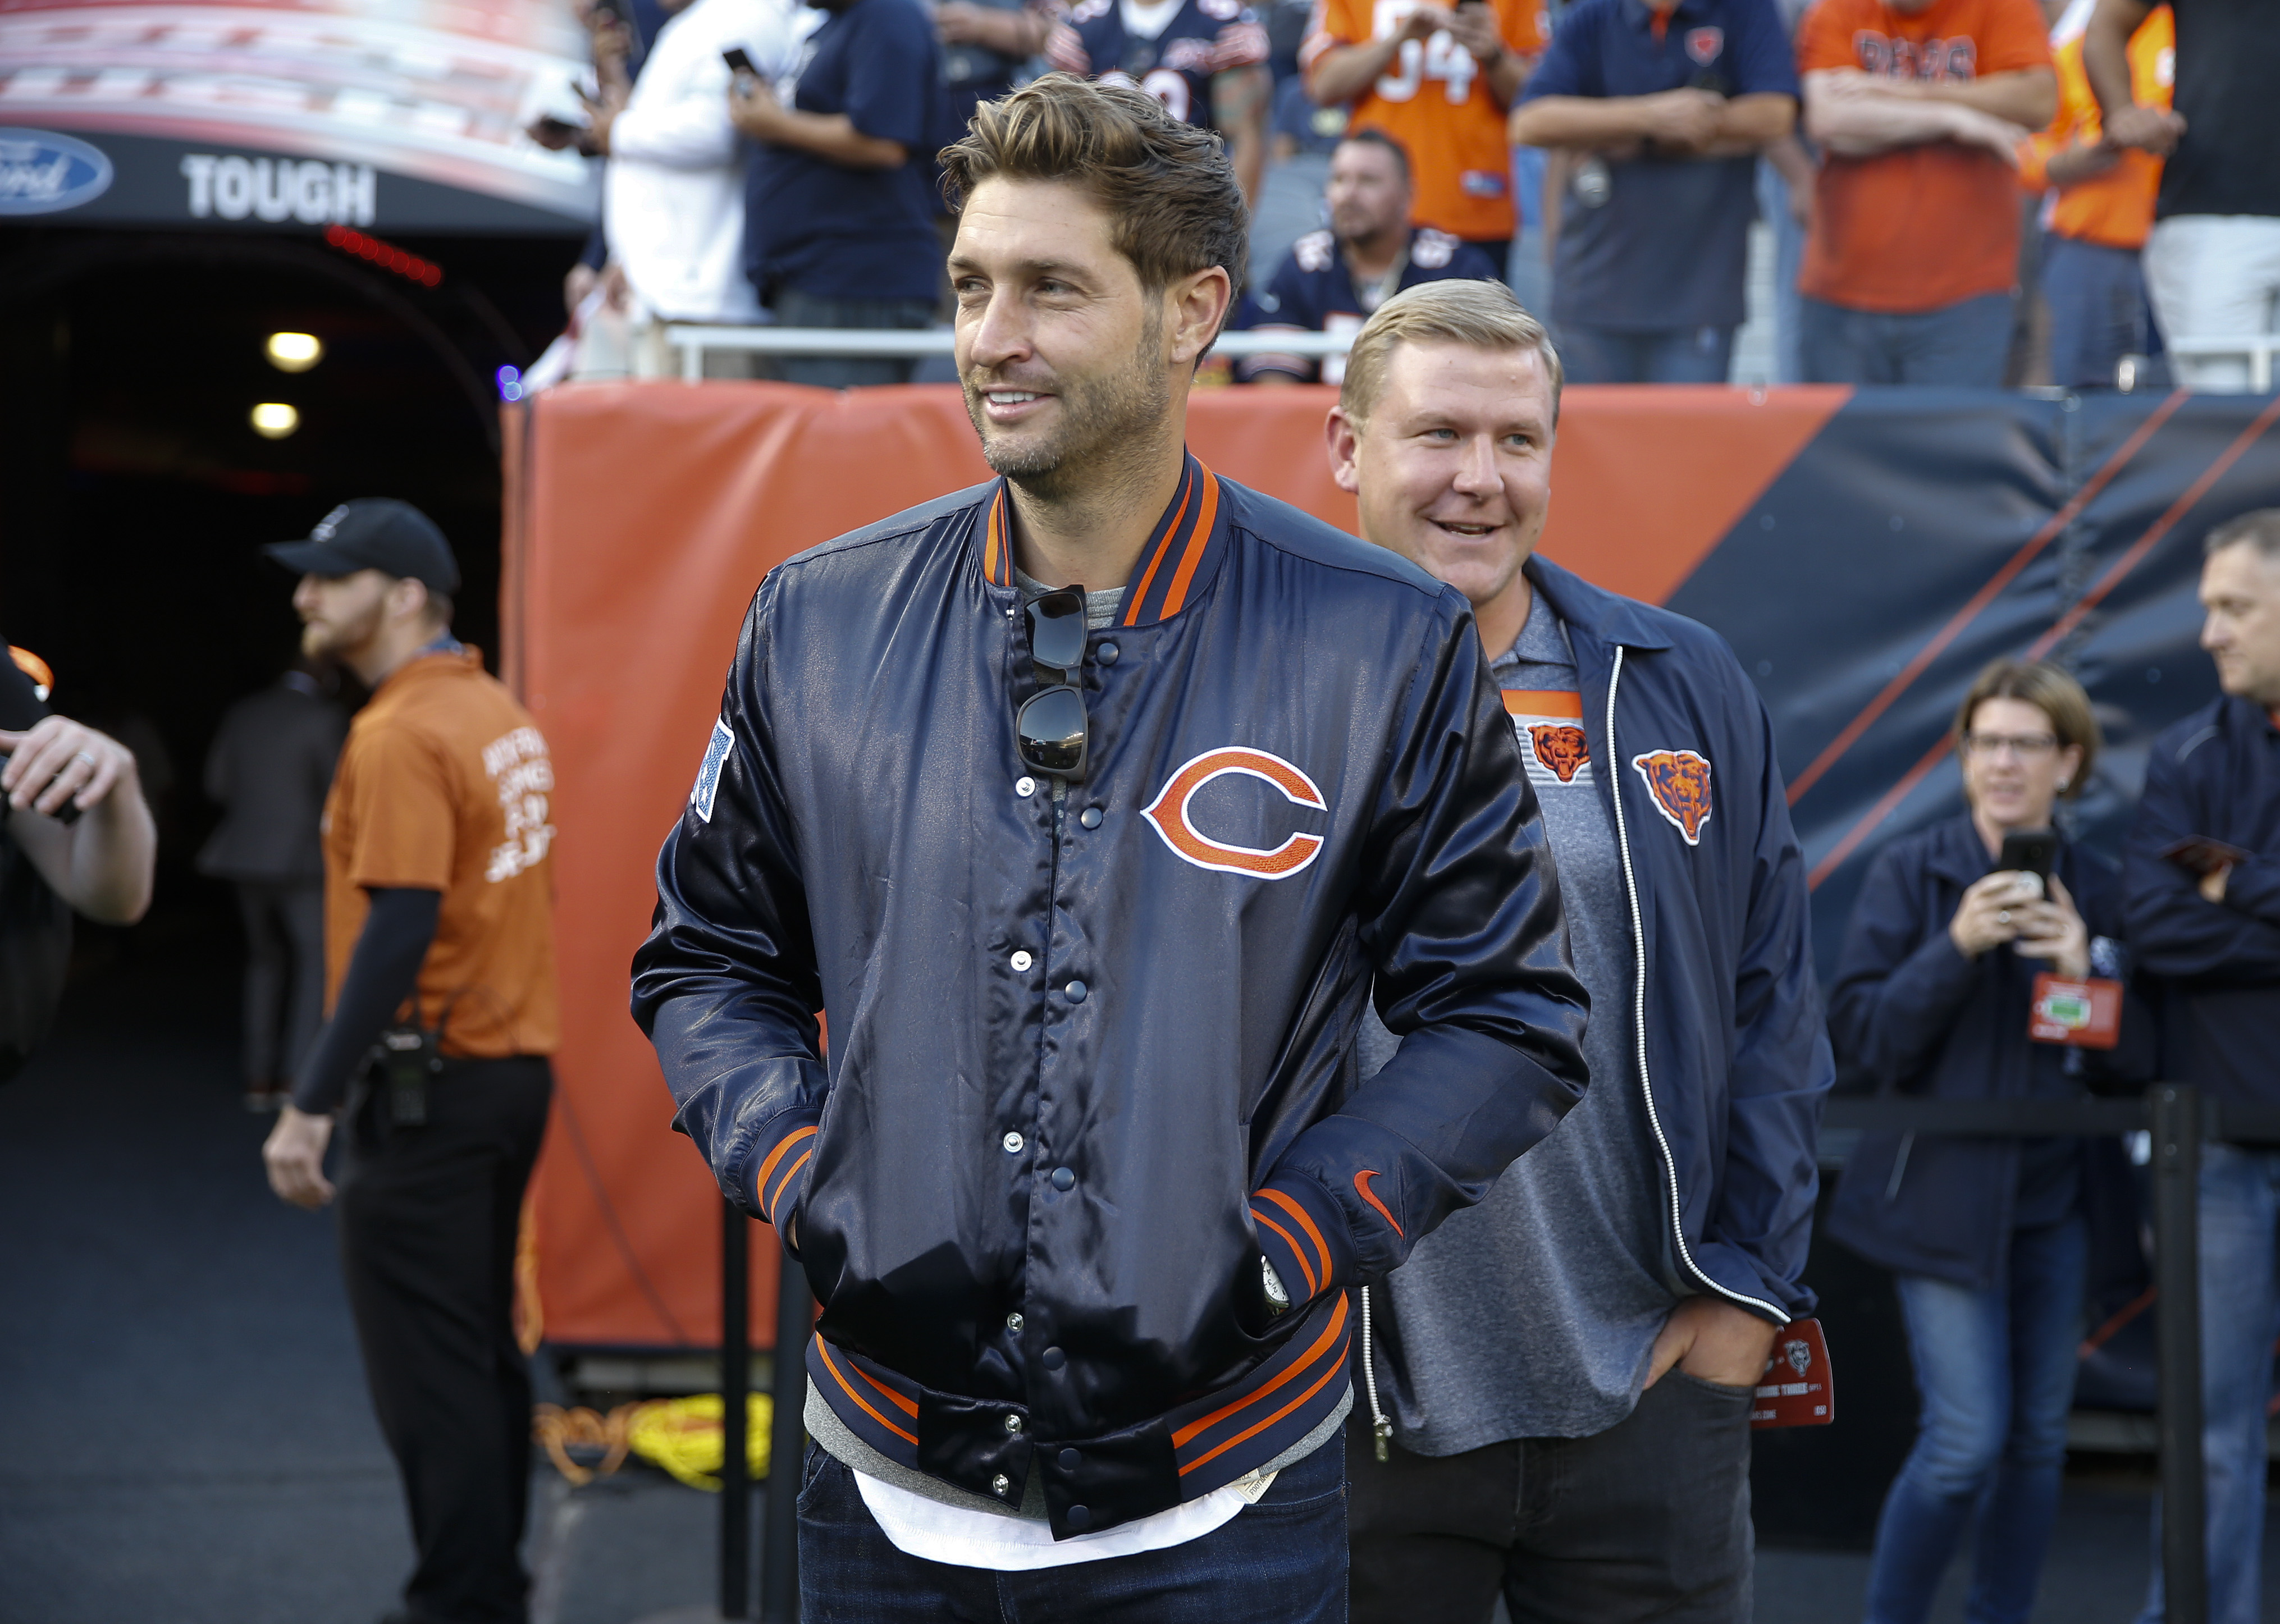 Jay Cutler takes in a game between the Bears and Packers in 2019